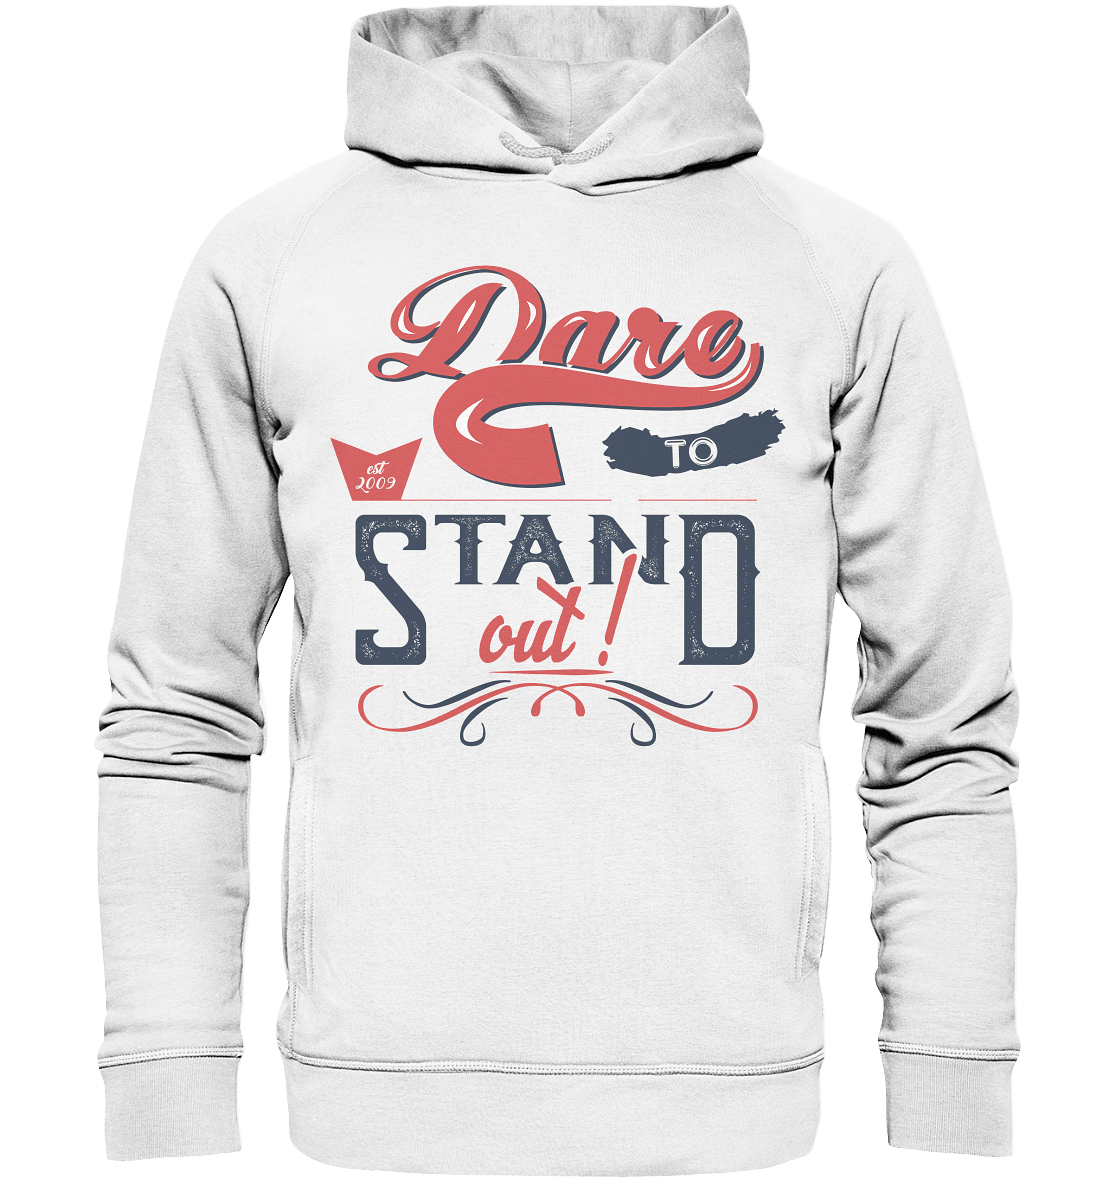 DARE TO STAND OUT!